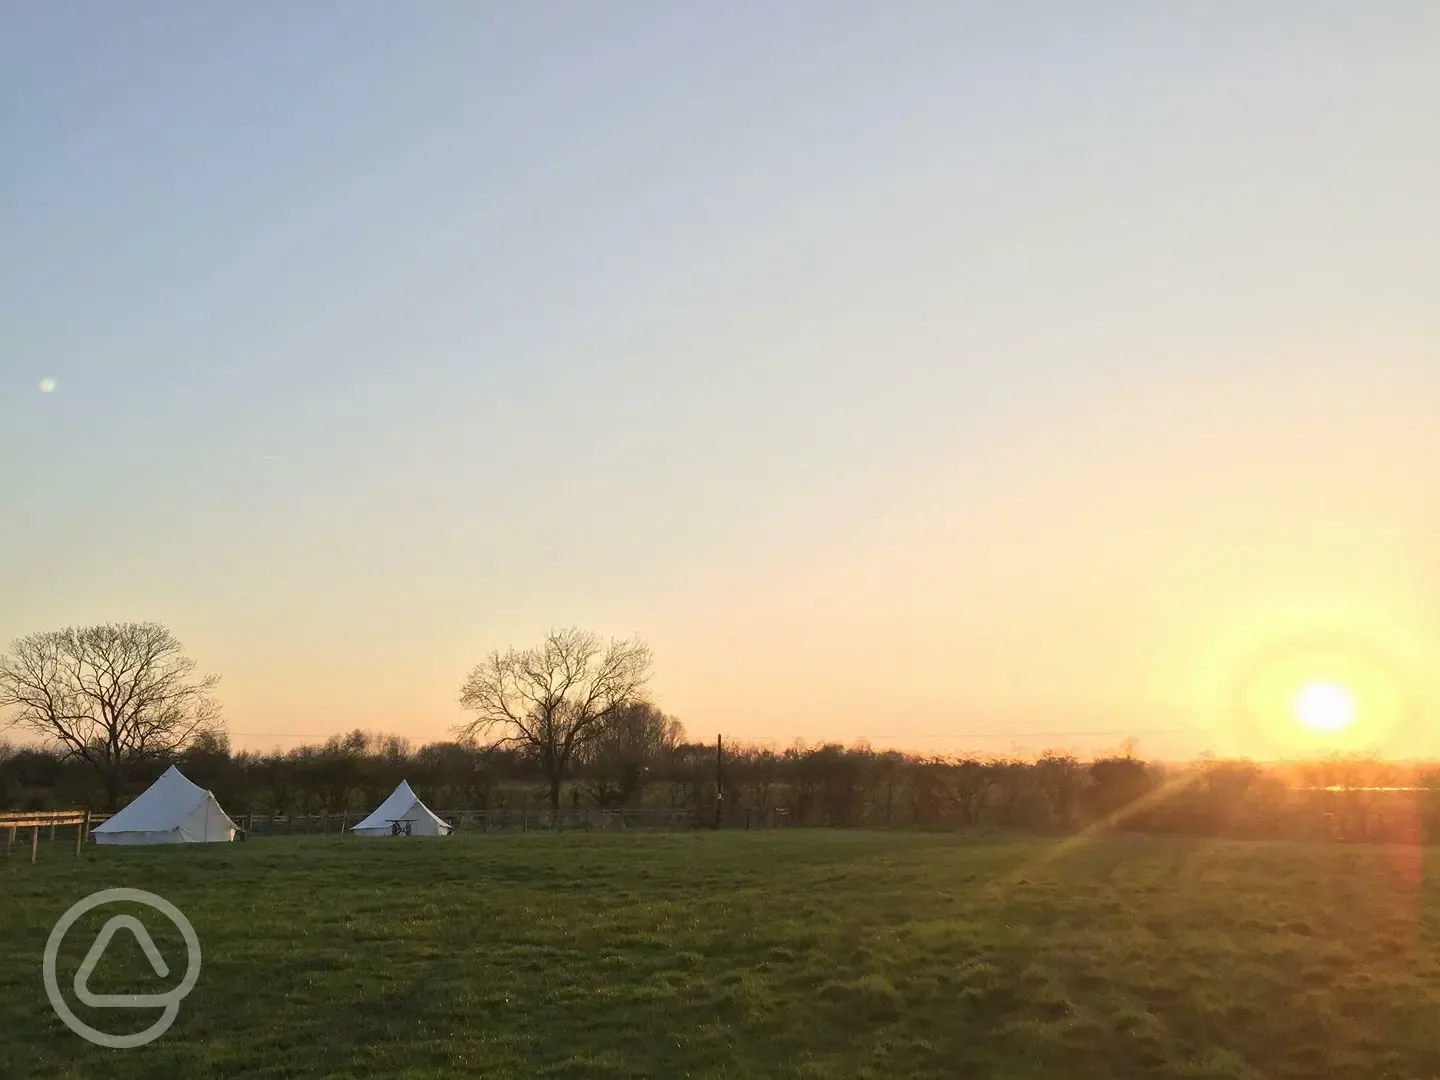 Skipbridge Farm Glamping, Providers of the great outdoors